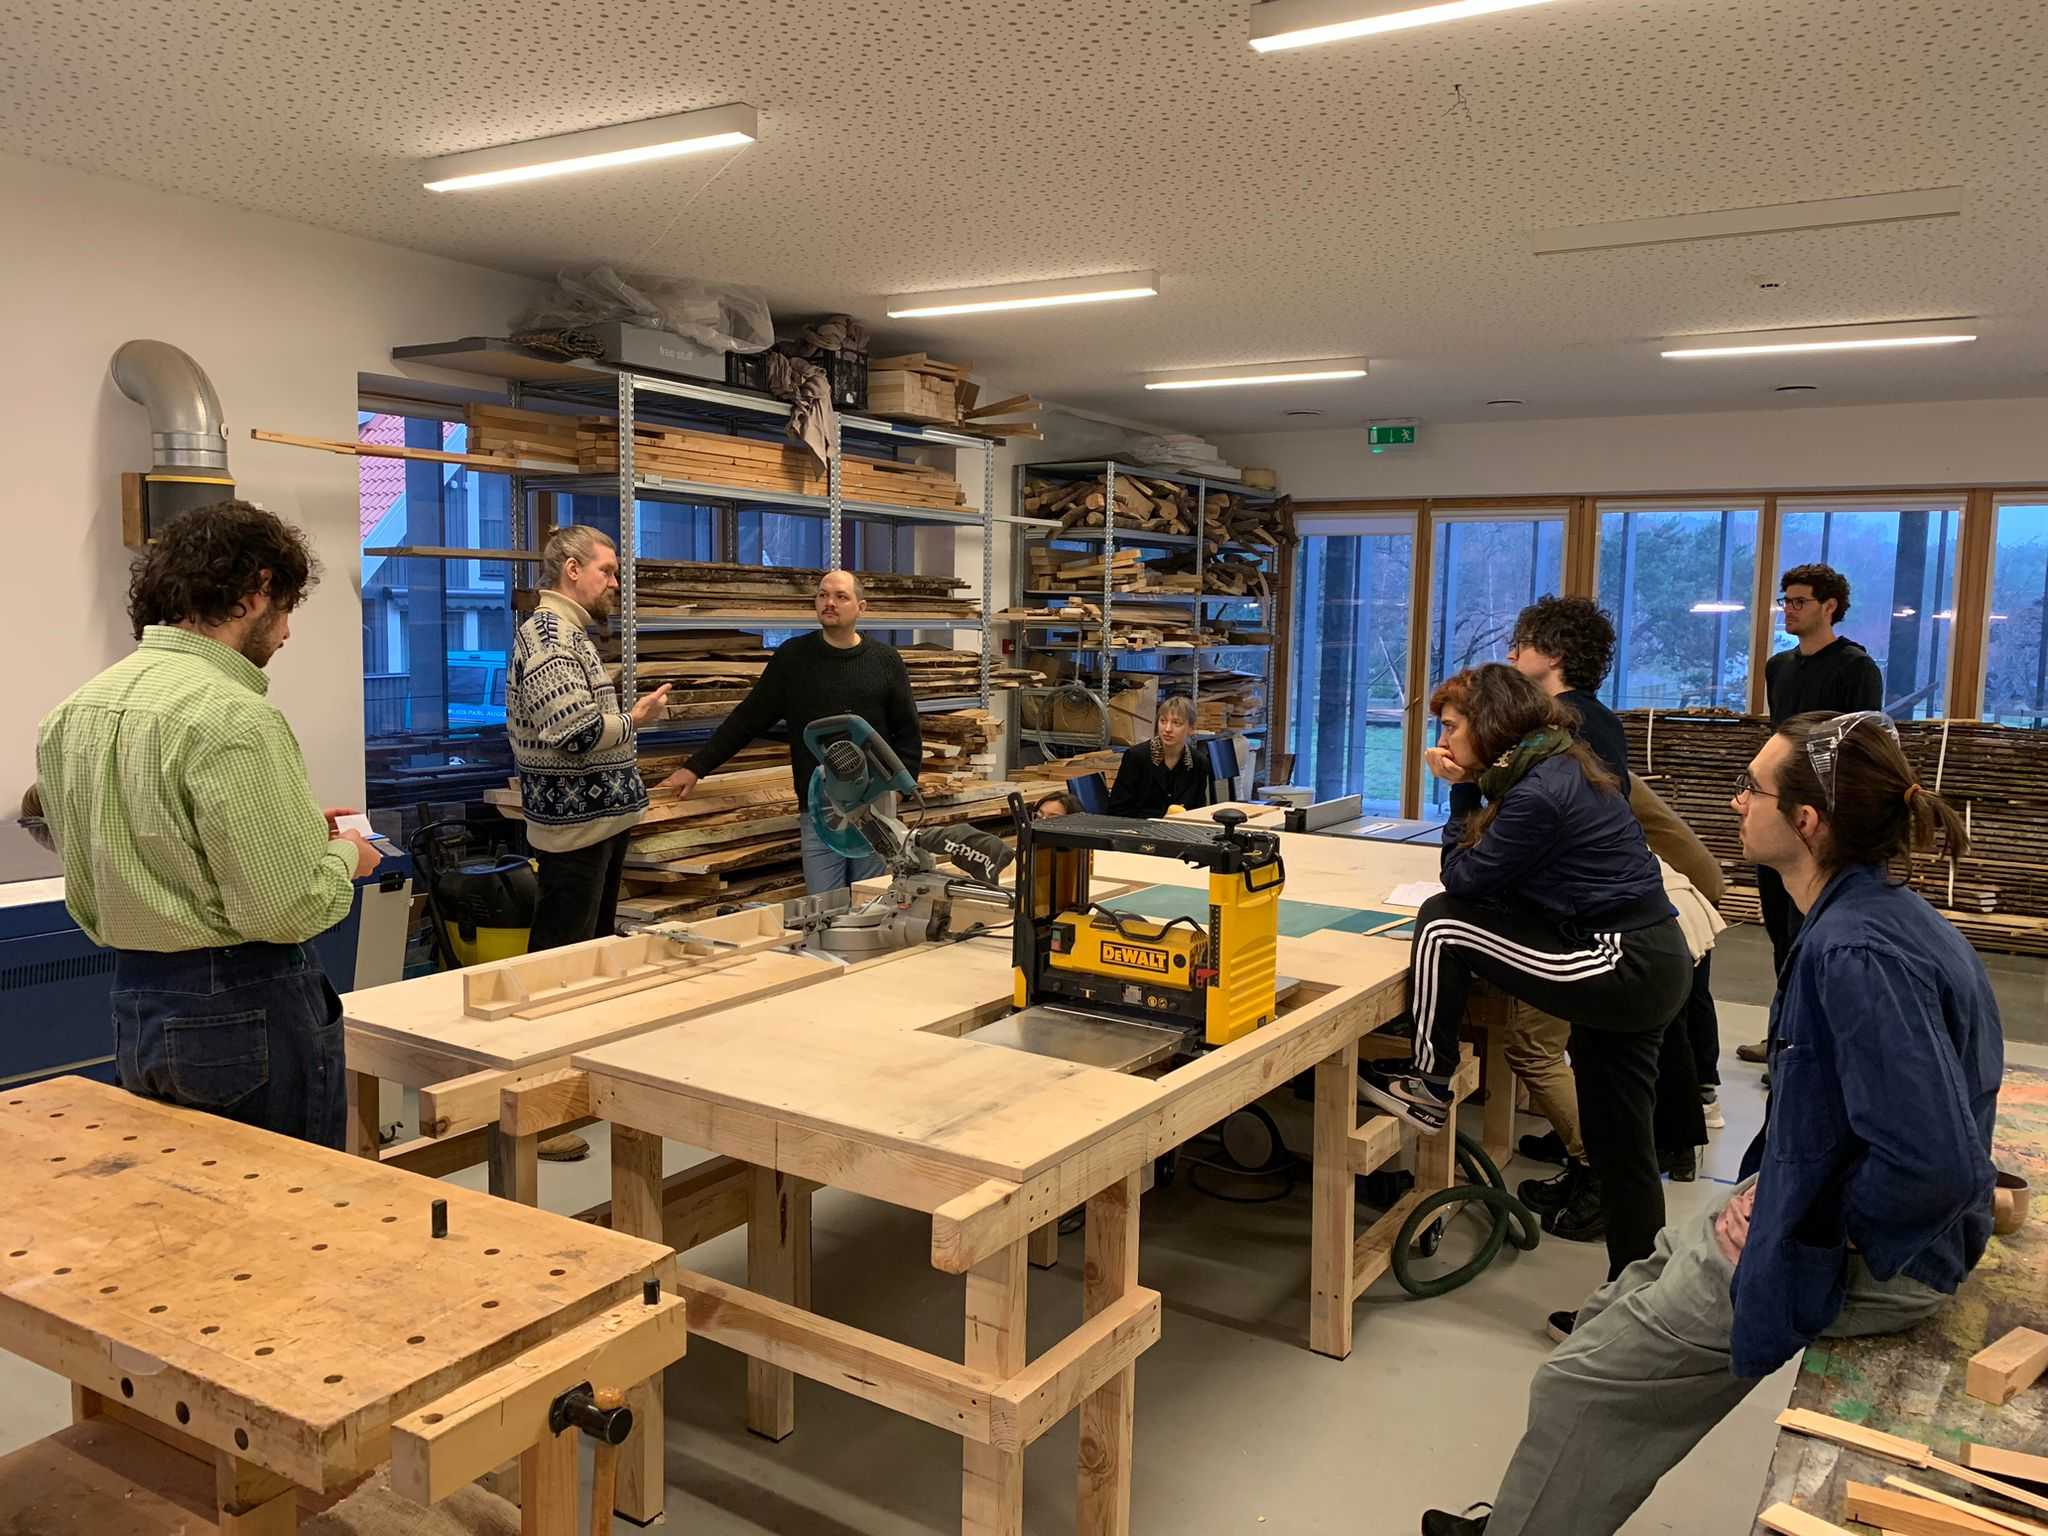 COOP study group - Curating Positions: A cut through the screen getting introduced to NAC's wood workshop facilities by Anton Shramkov. NAC (Nida Art Colony), Nida. January 2023. Photo credit: Peter Sattler.